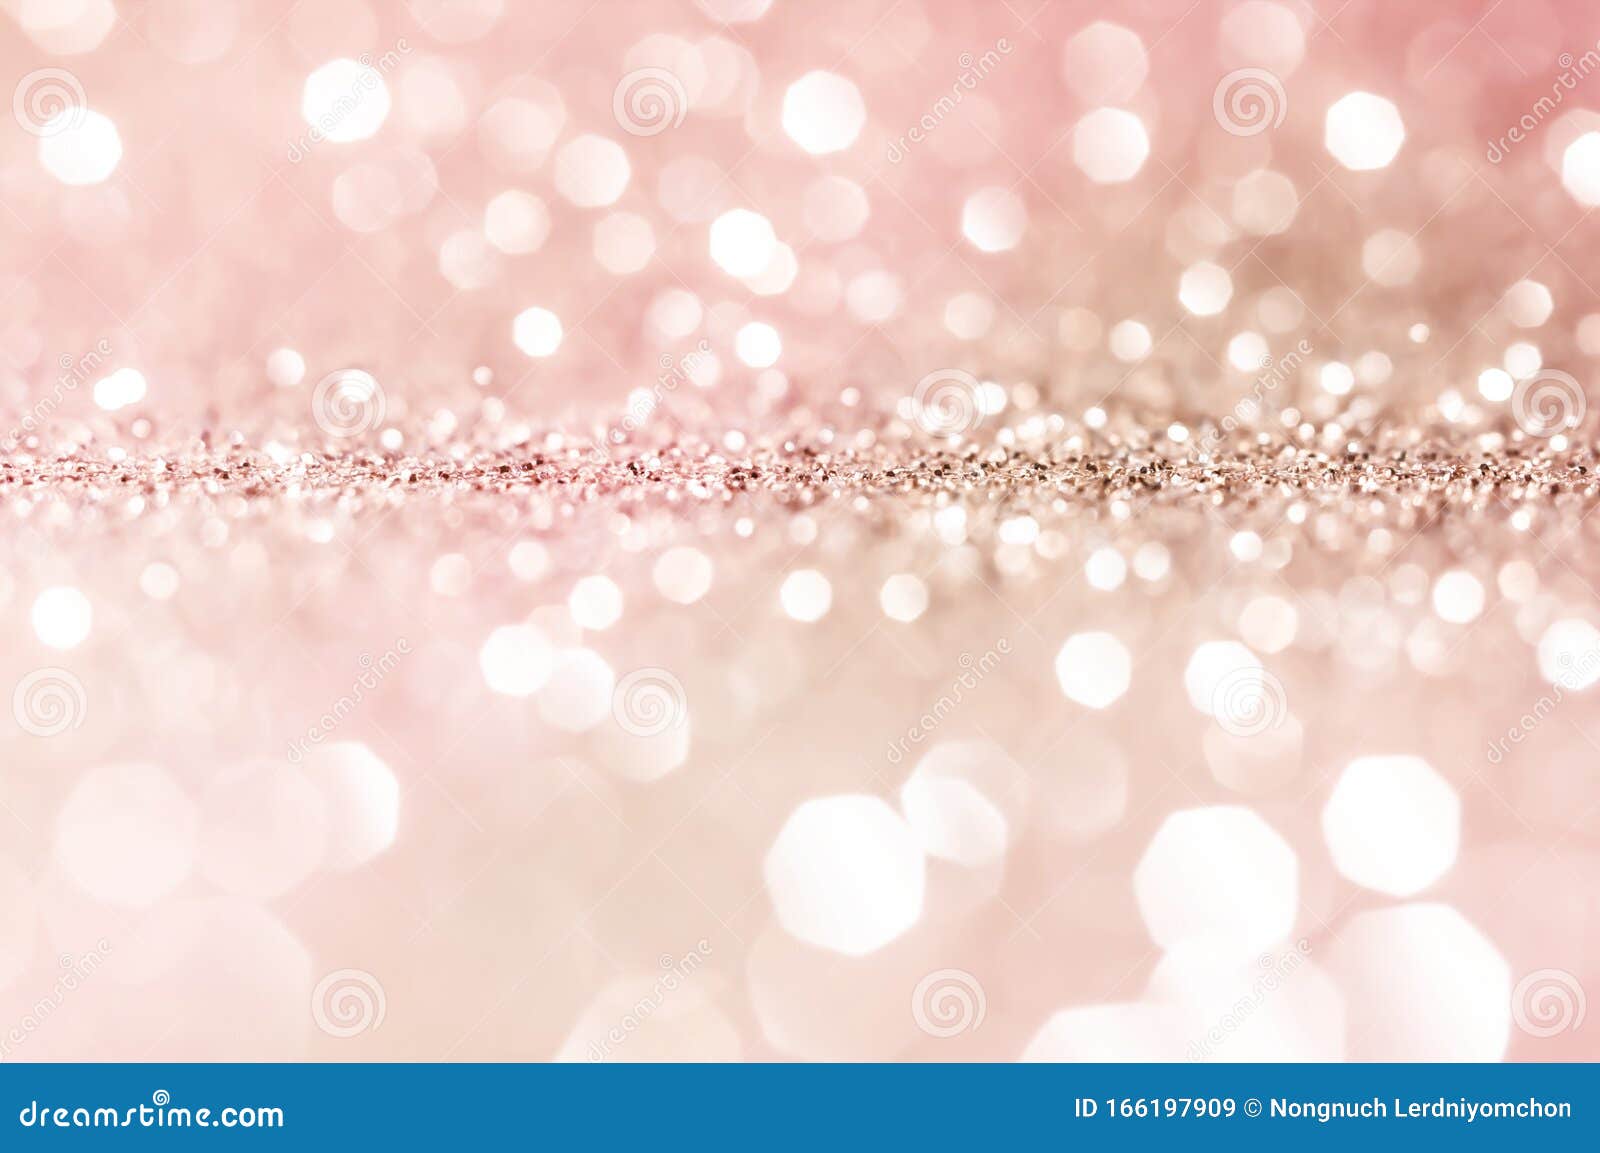 Pink Gold, Pink Bokeh,circle Abstract Light Background,Pink Gold Shining  Lights, Sparkling Glittering Valentines Day,women Day or Stock Image -  Image of backdrop, holiday: 166197909